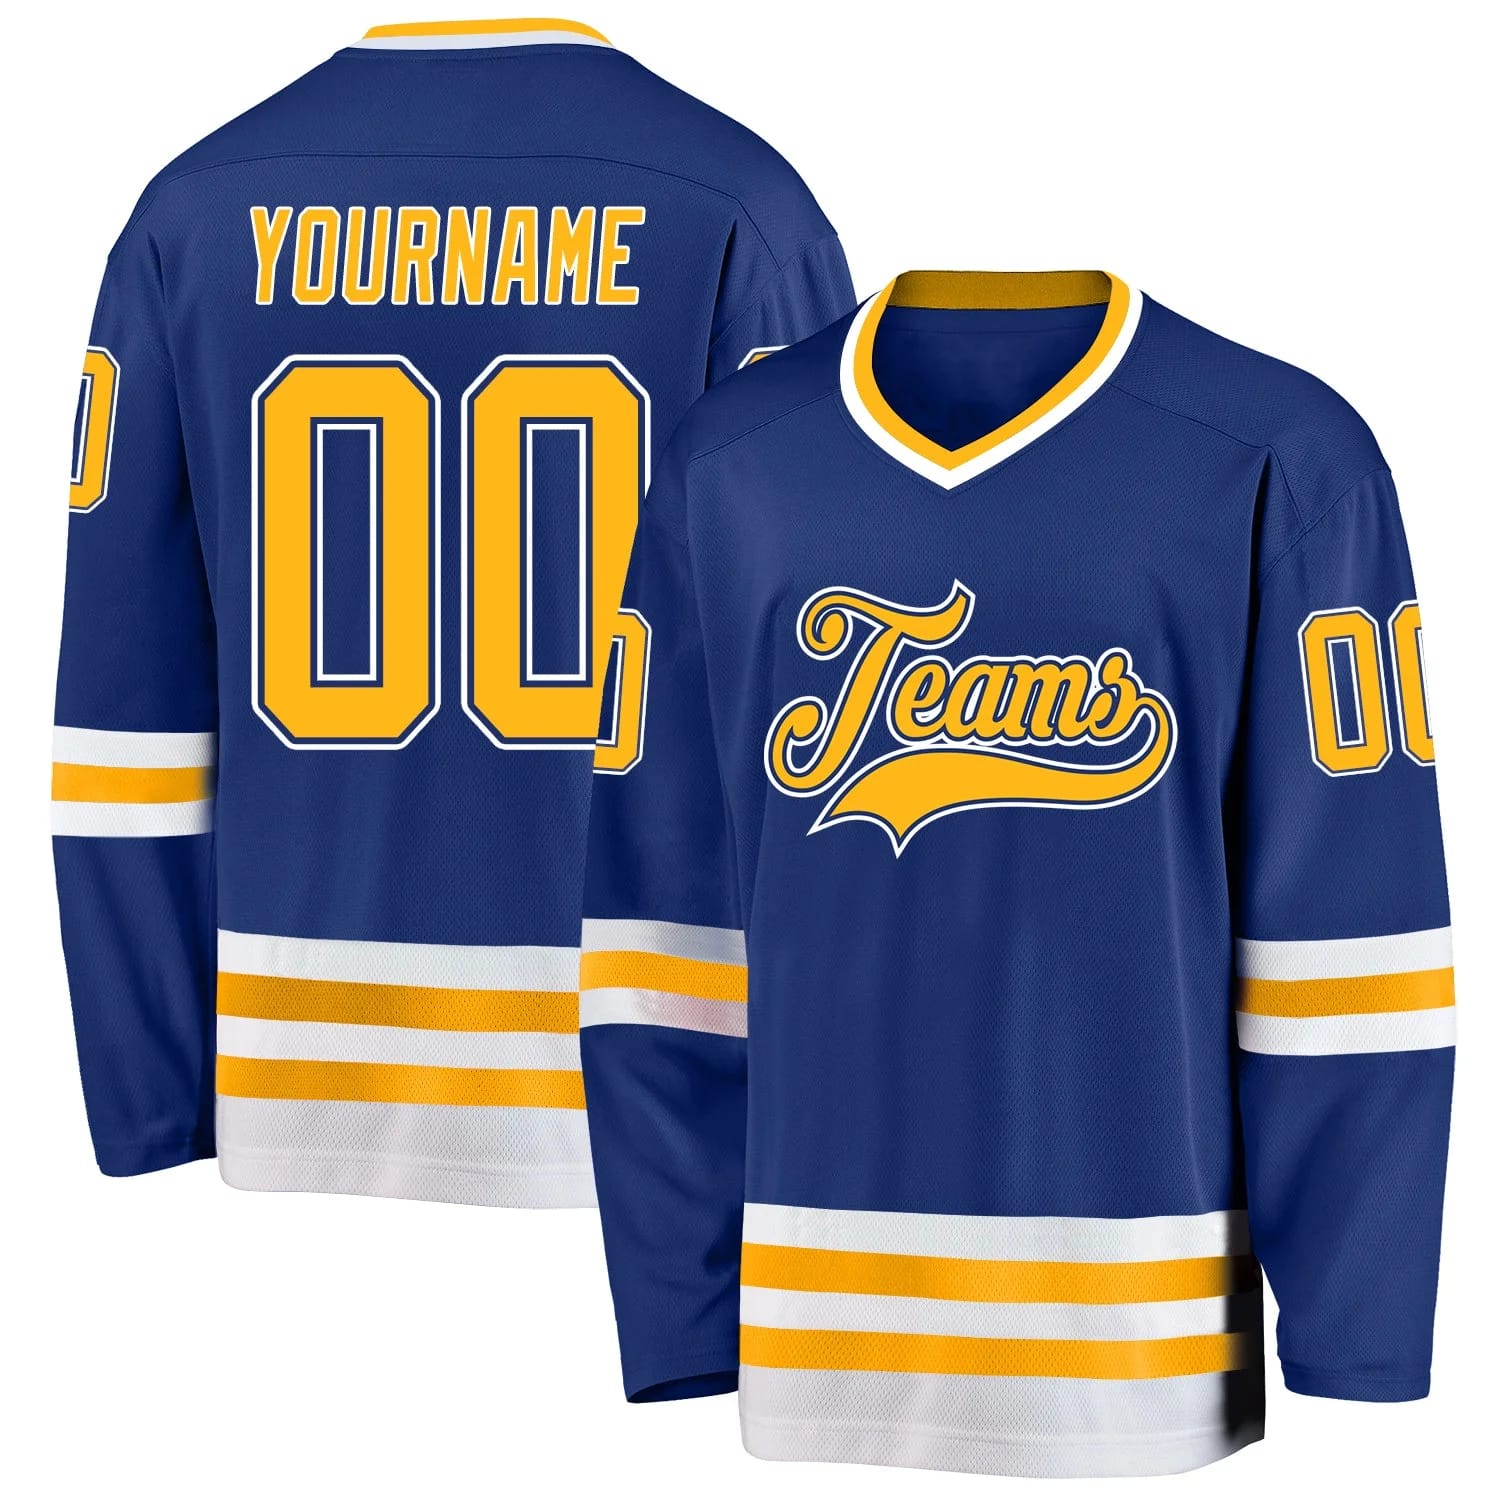 Stitched And Print Royal Gold-white Hockey Jersey Custom